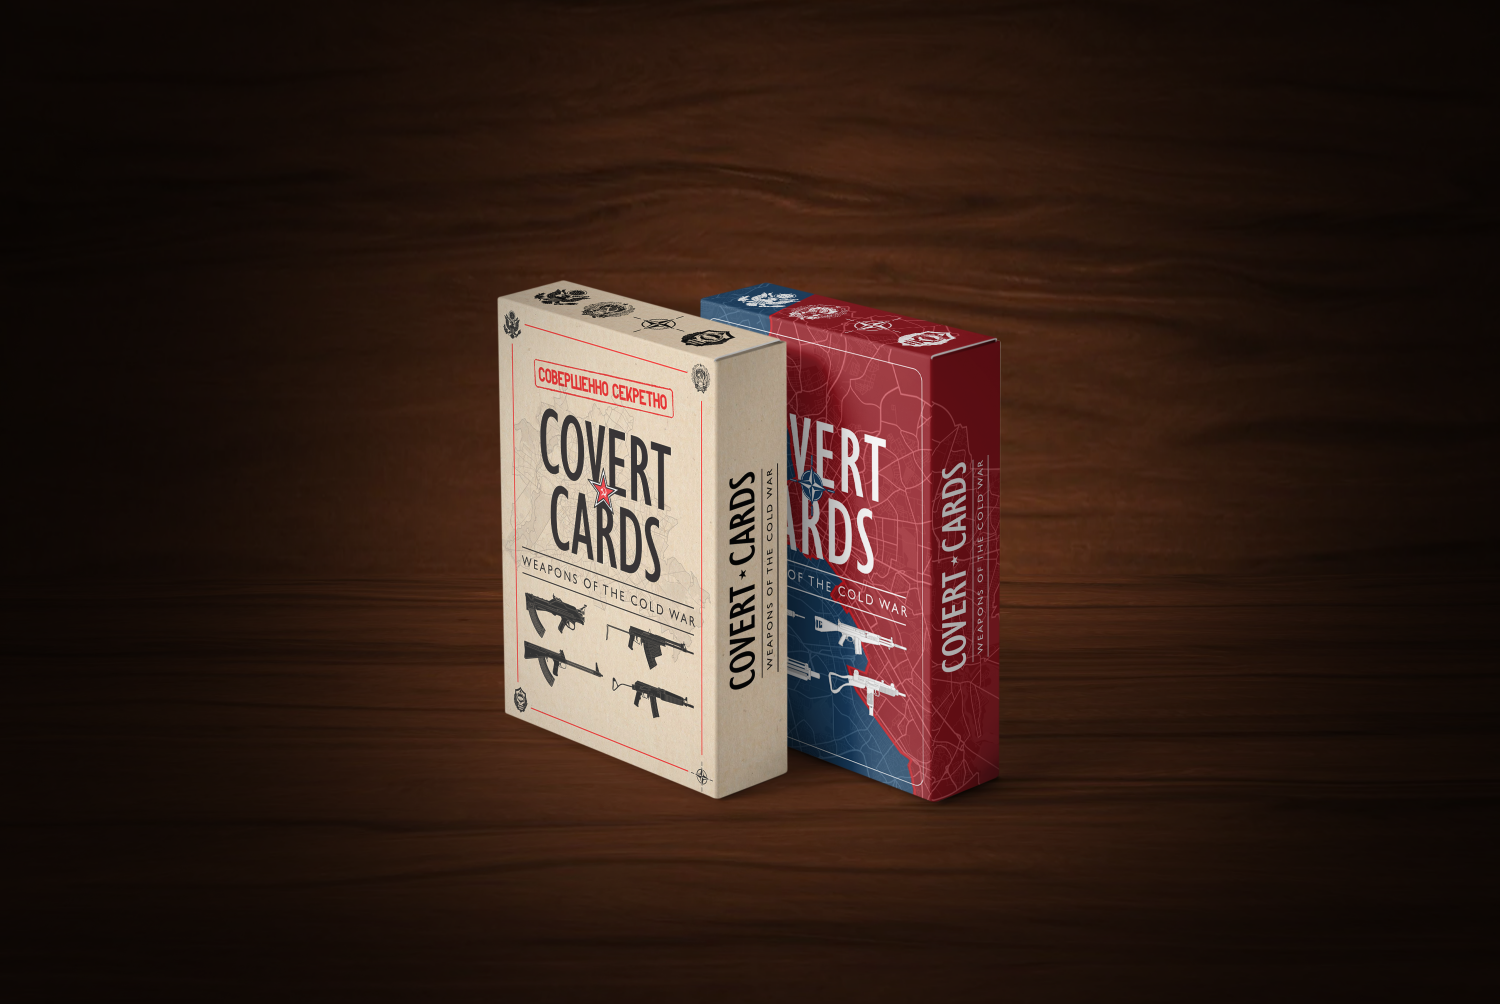 Helios House Press Launches Kickstarter for Covert Cards: Weapons of the Cold War